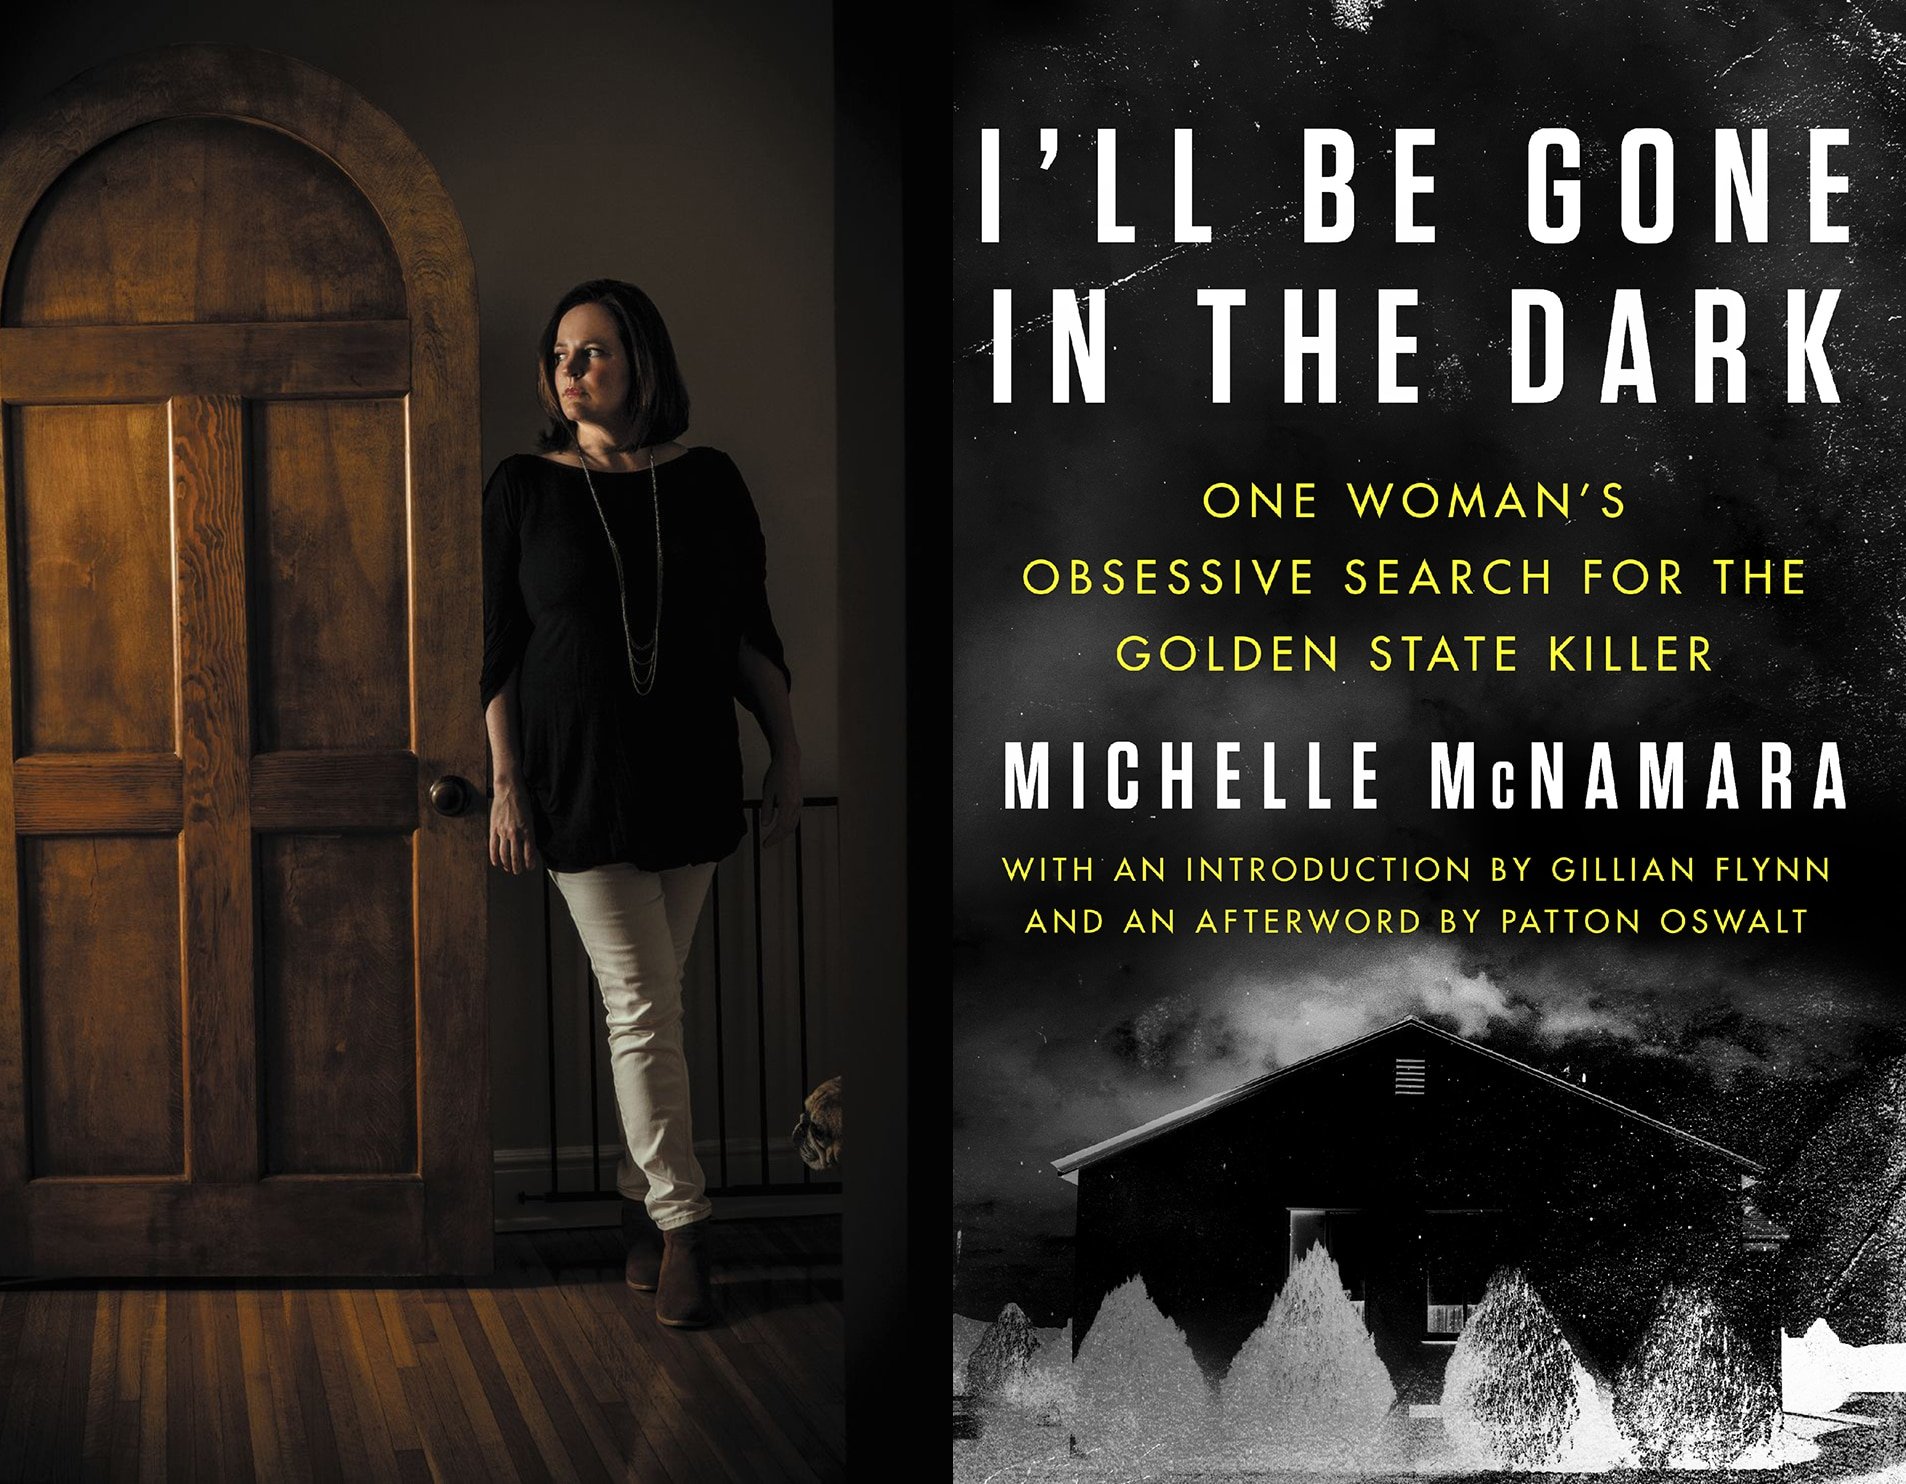 What Happened To Michelle McNamara, Who Tragically Died Investigating The Golden State Killer?